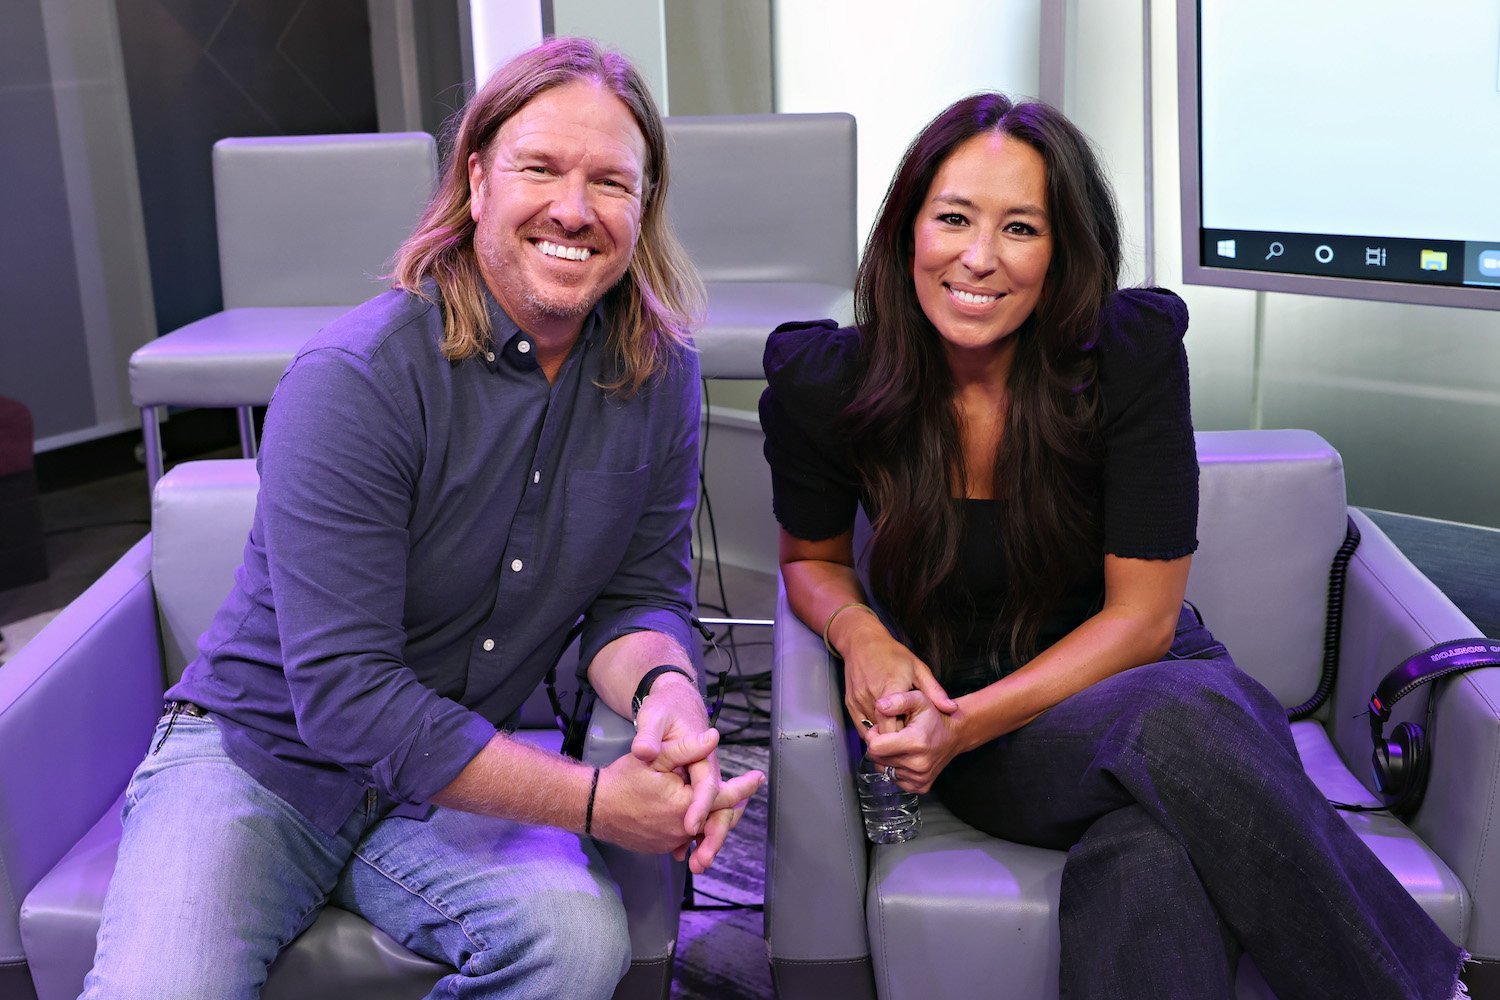 Chip and Joanna Gaines smile as they pose for the camera sitting in two chairs